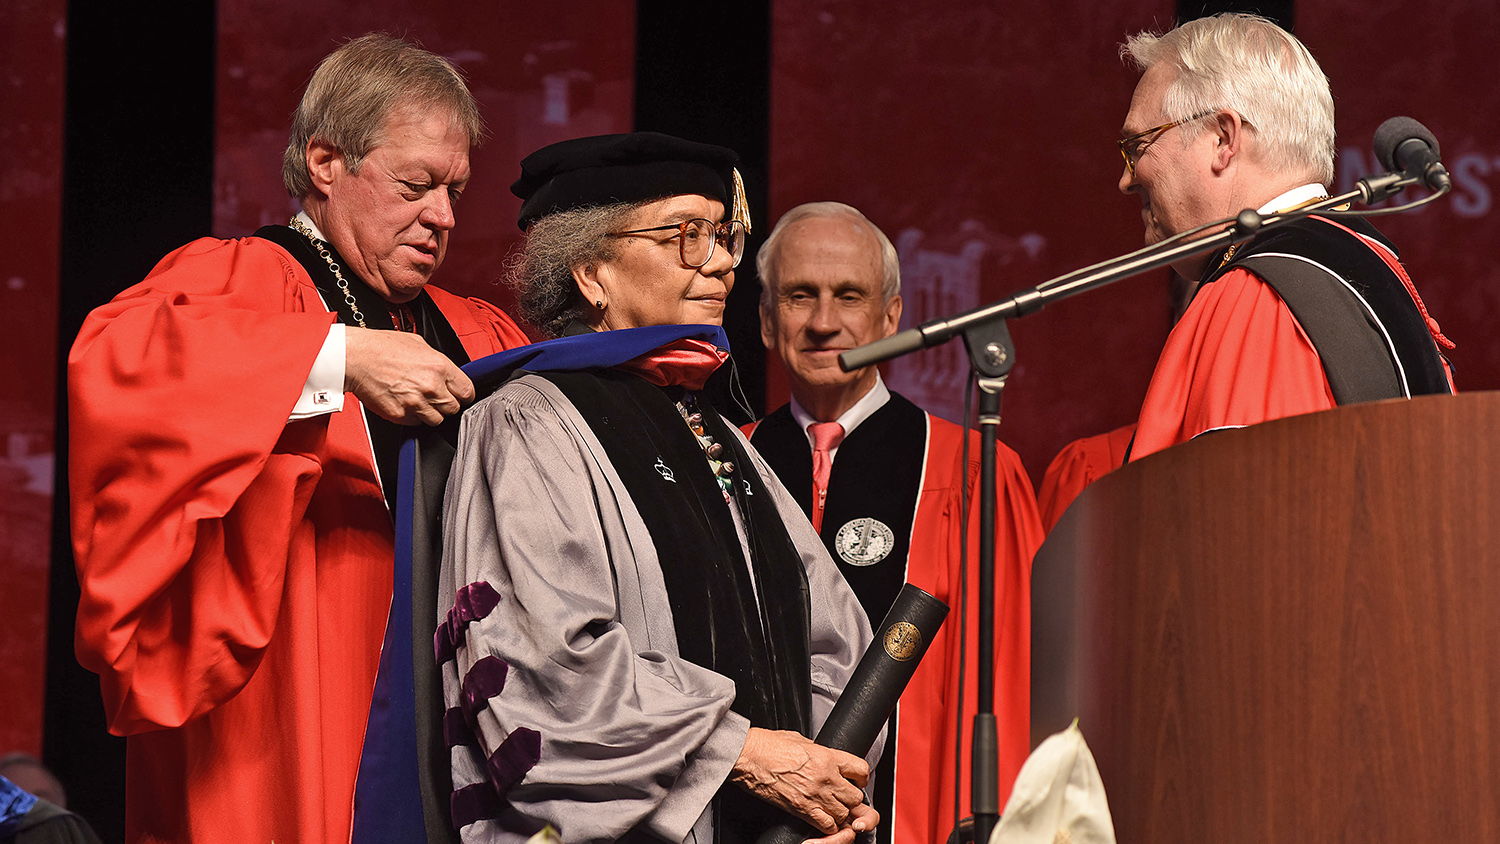 Board of Trusteess chair Jimmy Clark honors Marian Wright Edelman with an honorary doctorate.